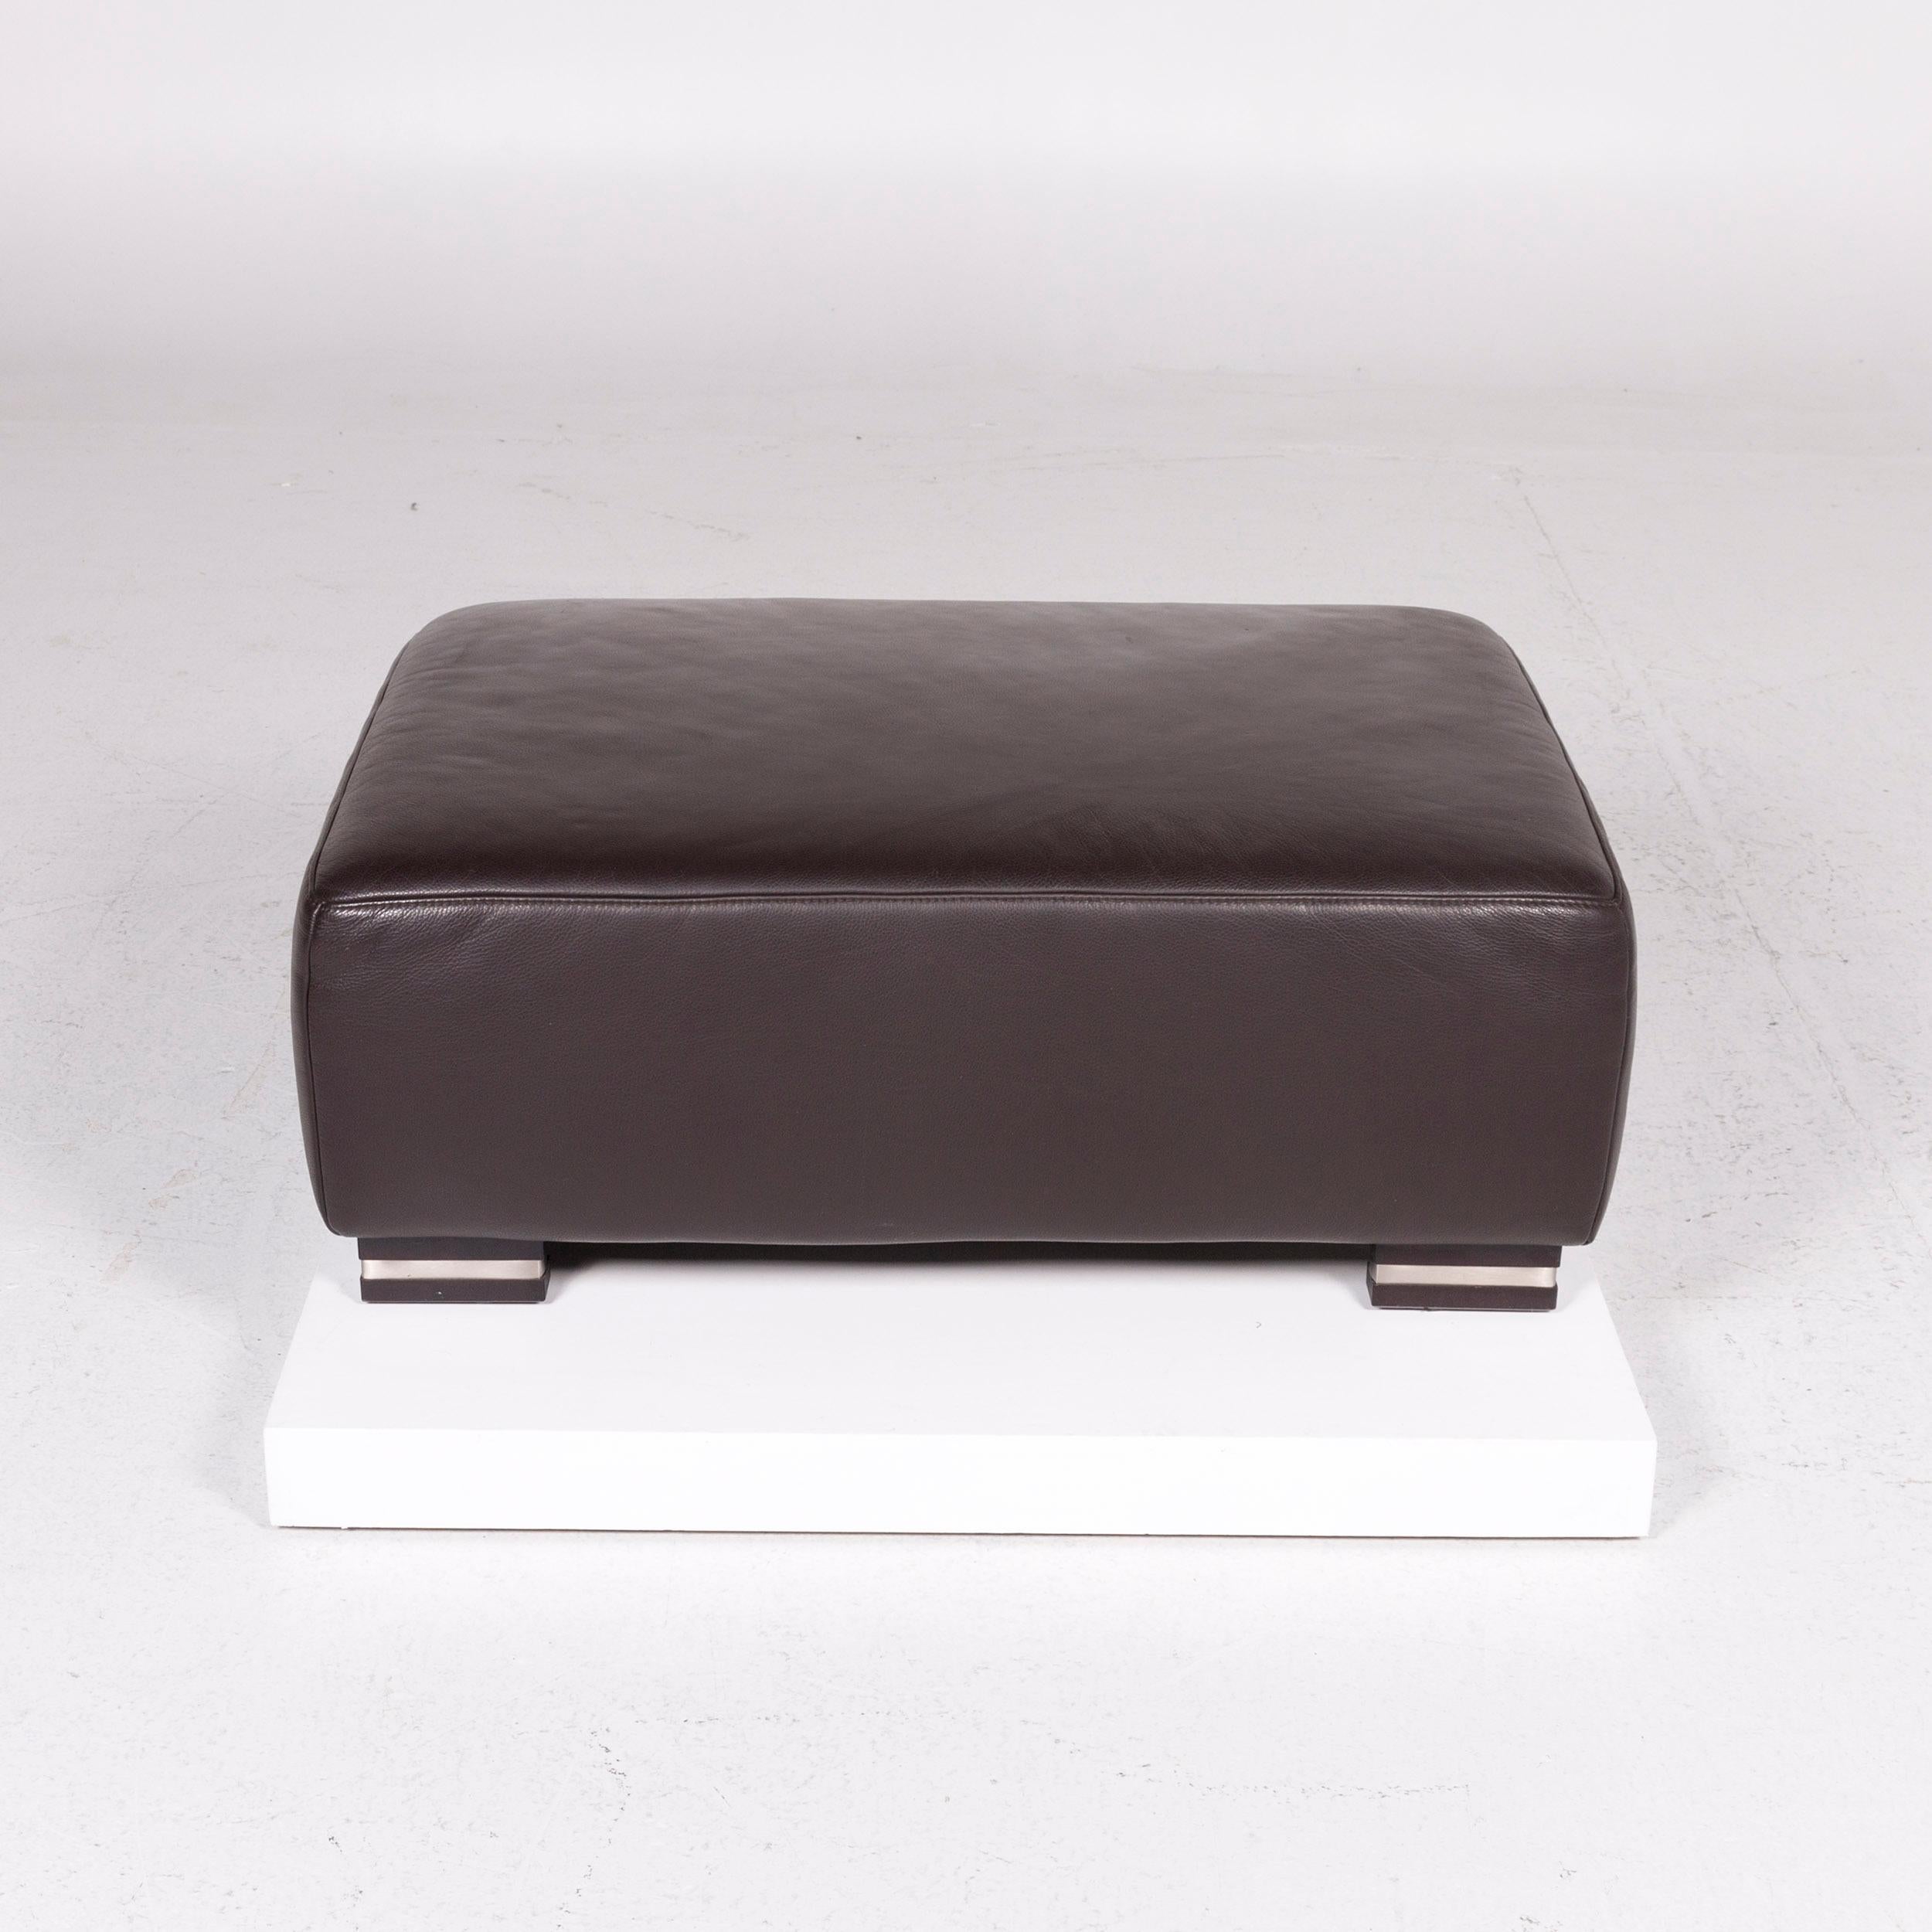 Contemporary Ewald Schillig Bentley Leather Stool Brown Ottoman For Sale